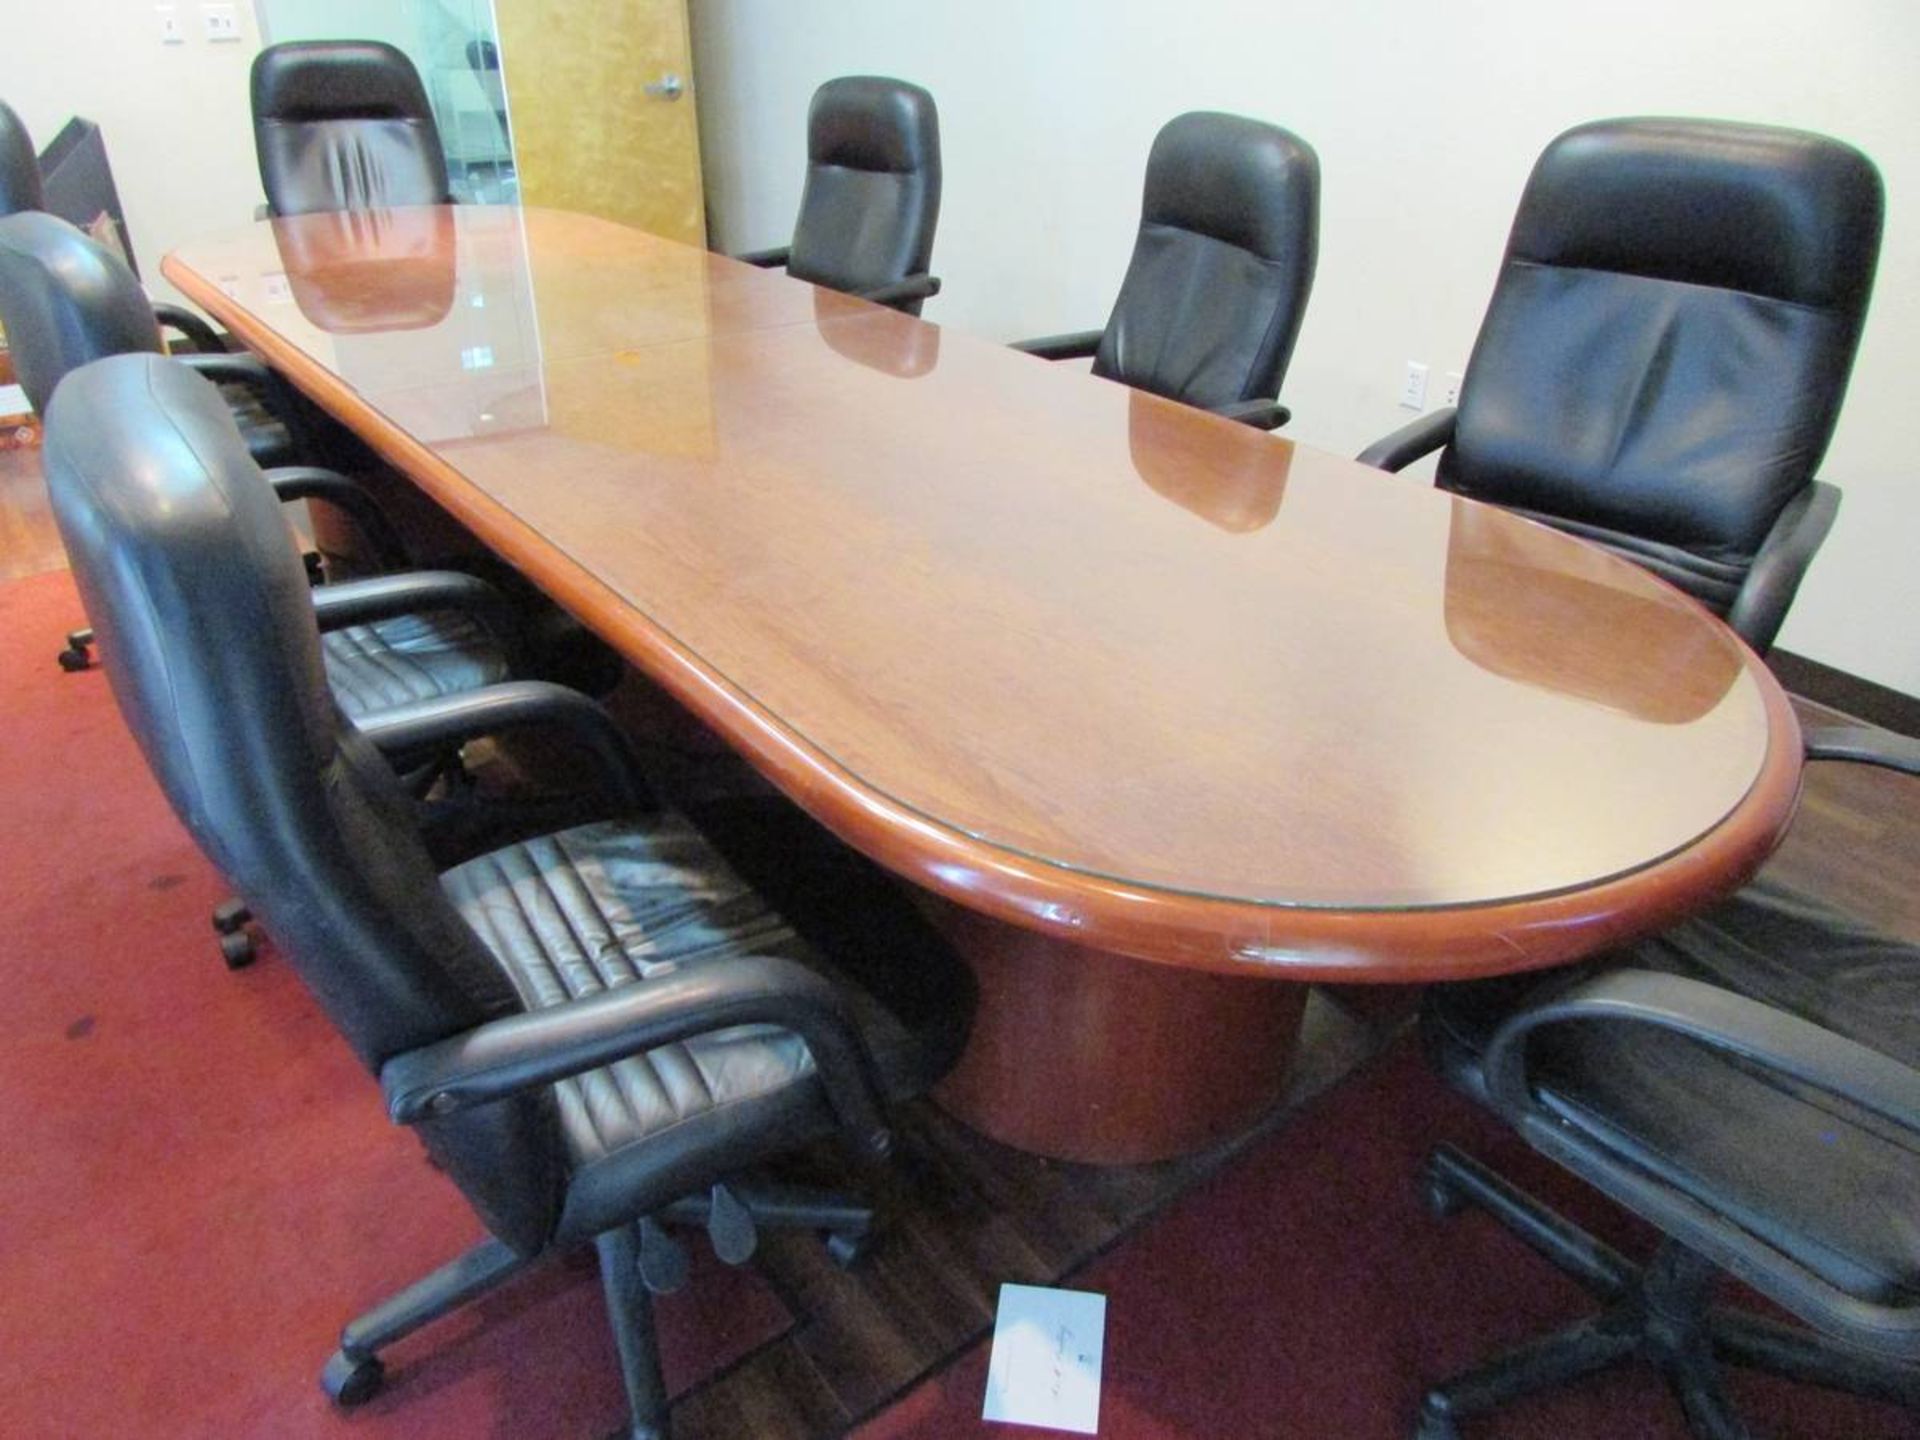 14'x4' Wood Conference Room Table - Image 3 of 9